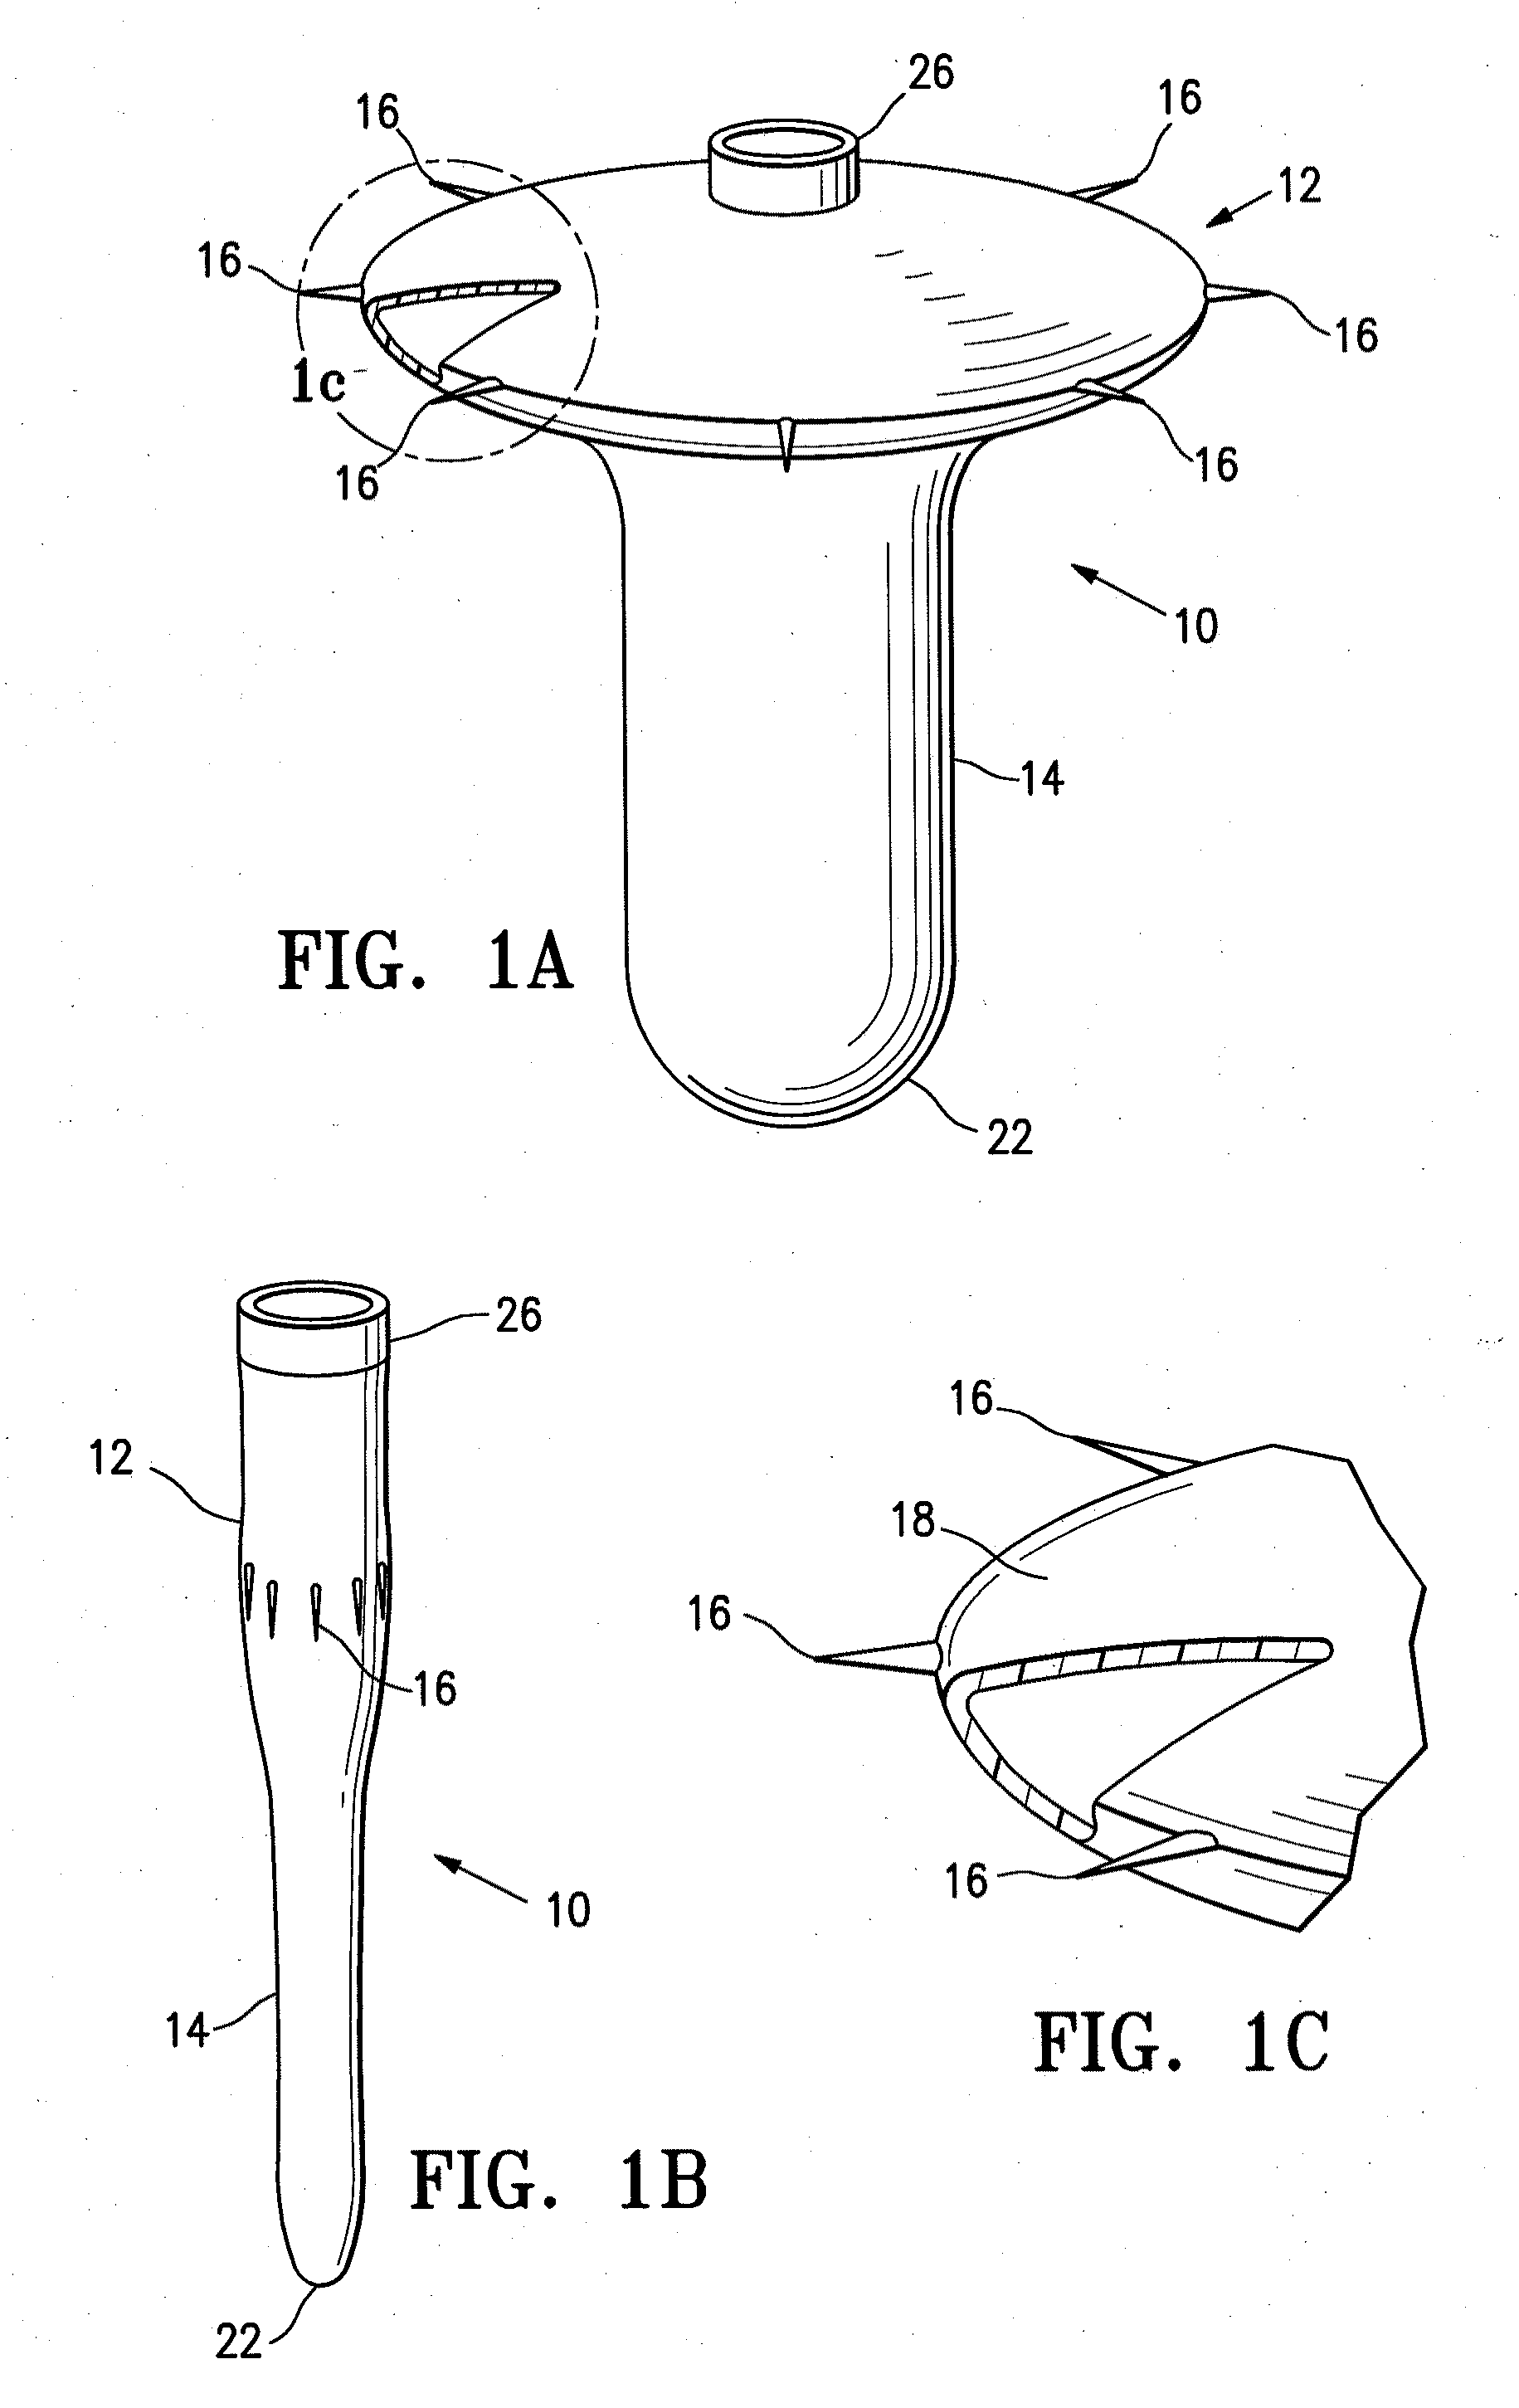 Inflatable ventricular partitioning device